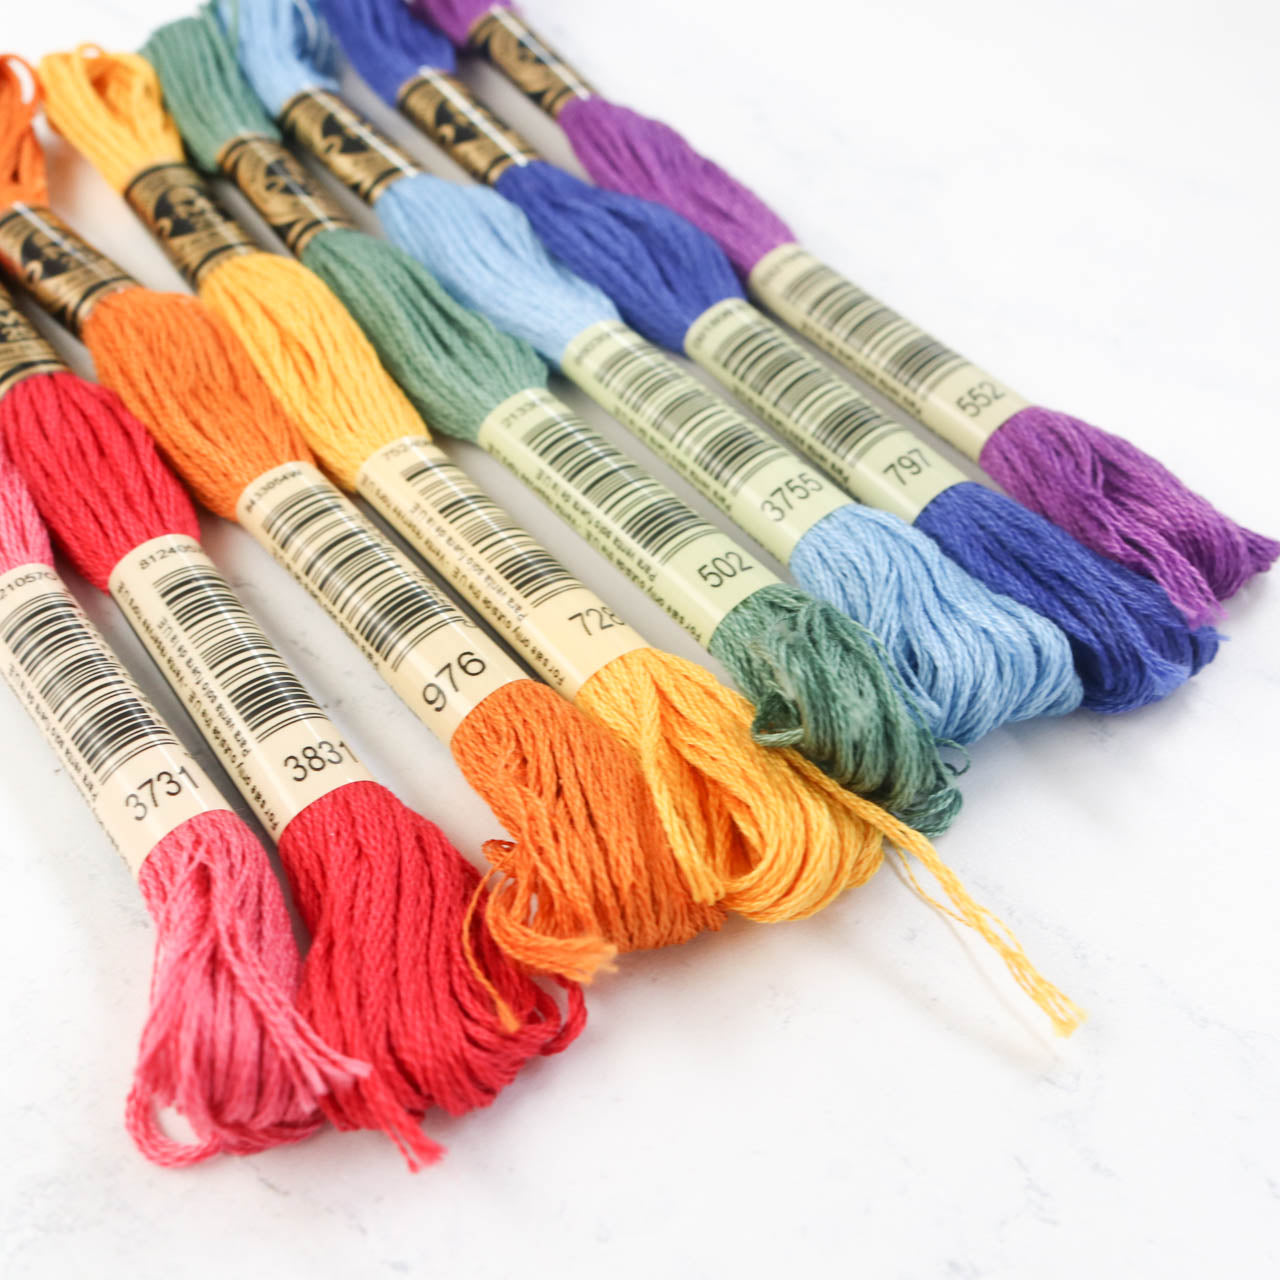 DMC 3831 - Embroidery Floss Skein 8m